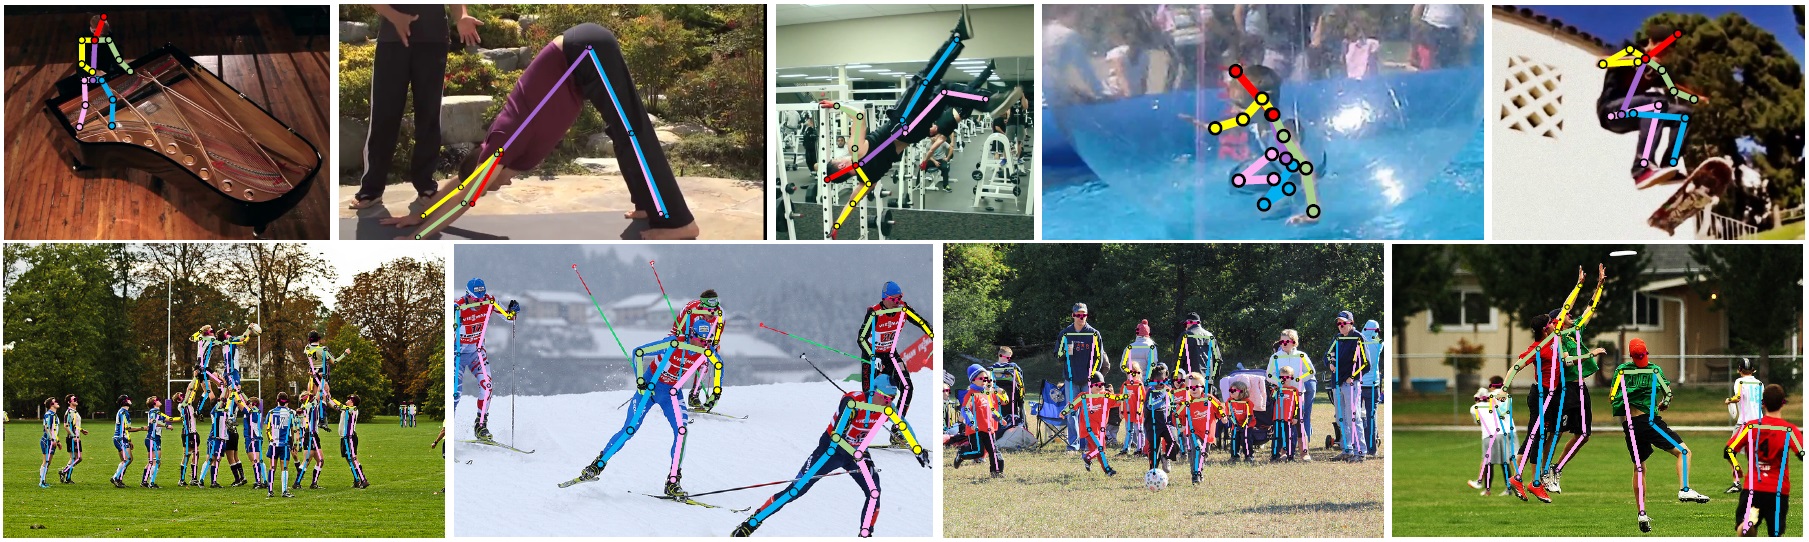 Multi-Task Deep Learning for Real-Time 3D Human Pose Estimation and Action  Recognition